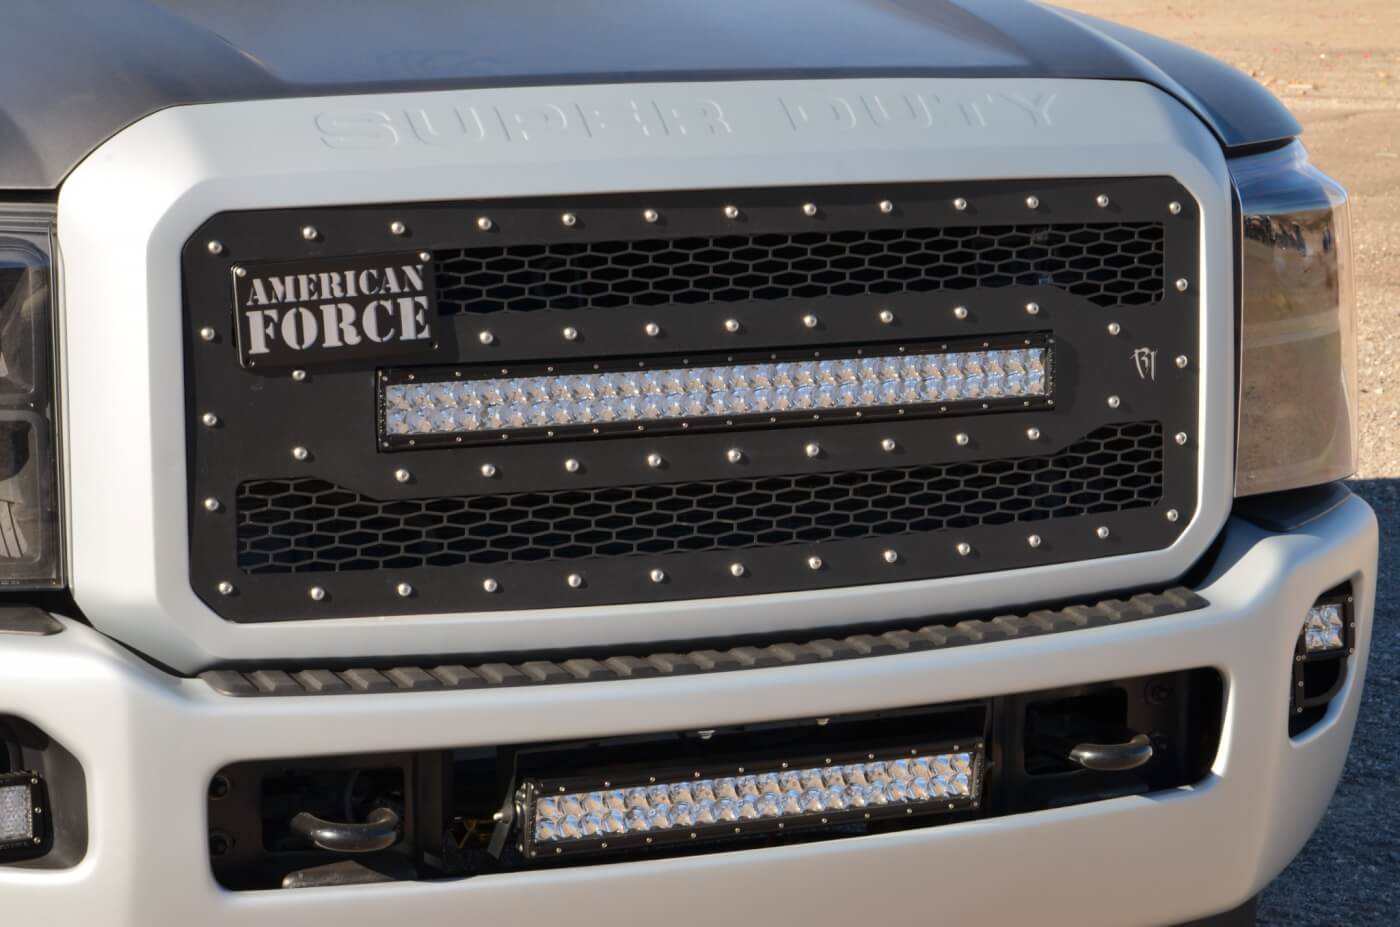 It’s all Rigid up front, starting with their 40566 grille insert and a pair of E Series LED light bars, also from Rigid.